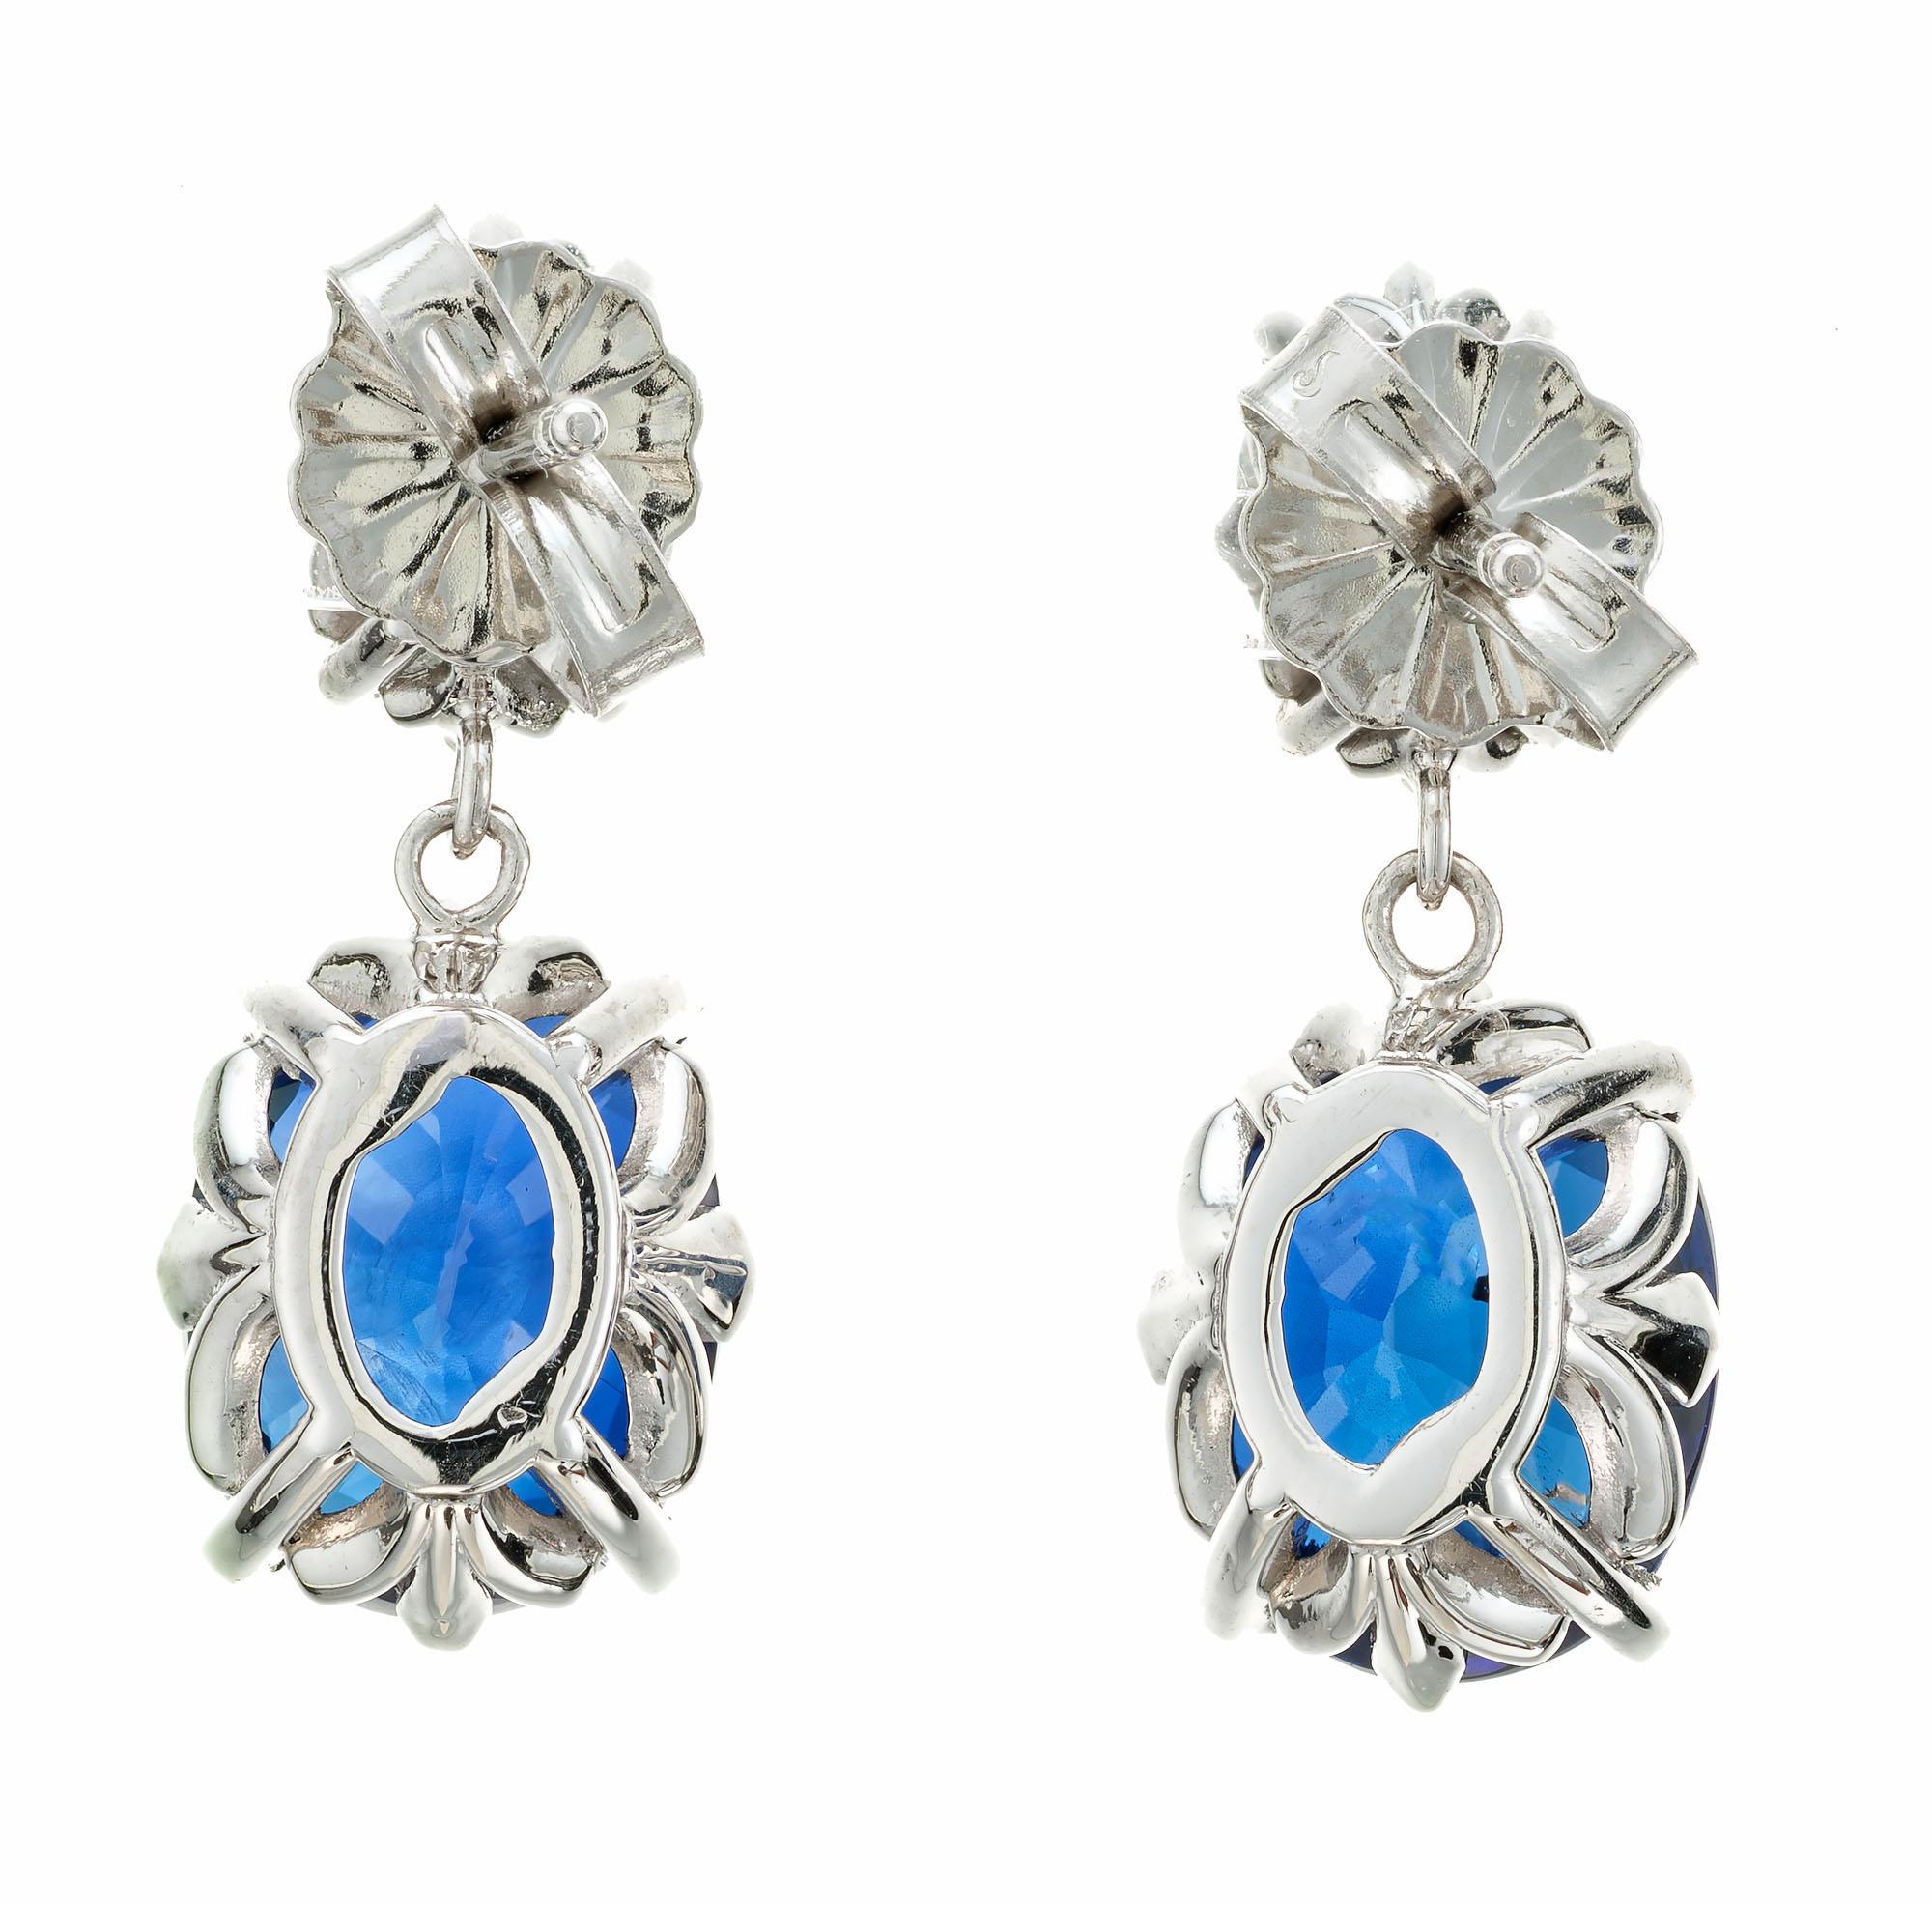 Peter Suchy GIA Certified 5.03 Carat Sapphire Diamond Platinum Dangle Earrings In New Condition For Sale In Stamford, CT